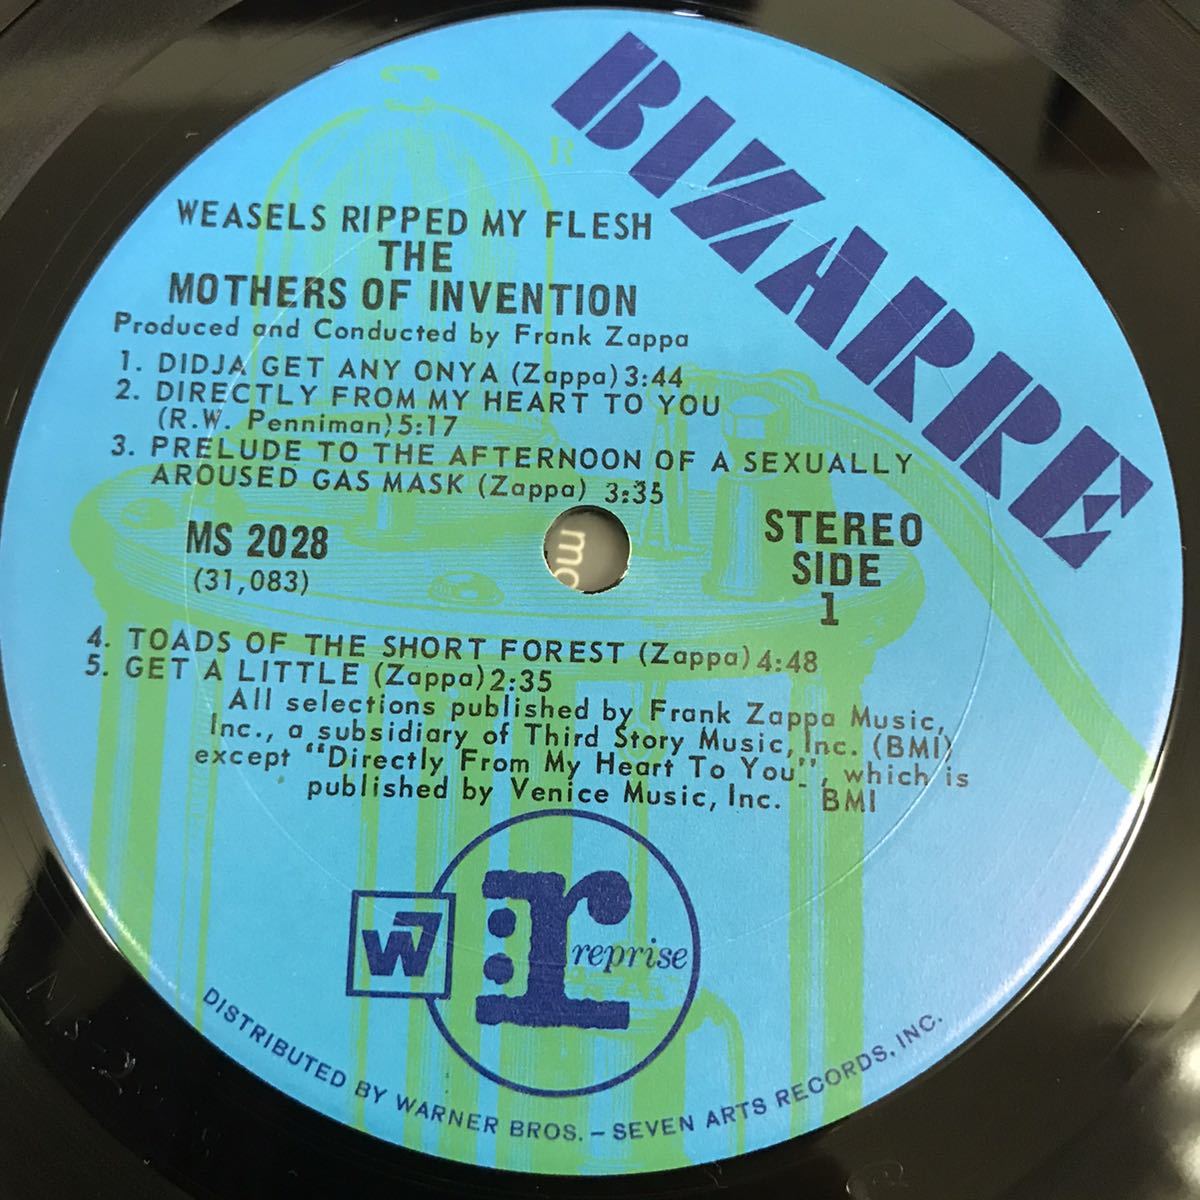 USオリジナル ほぼ美品 シュリンク付 LP Frank Zappa & The Mothers of Invention / Weasels Ripped My Flesh いたち野郎 MS 2028_画像3